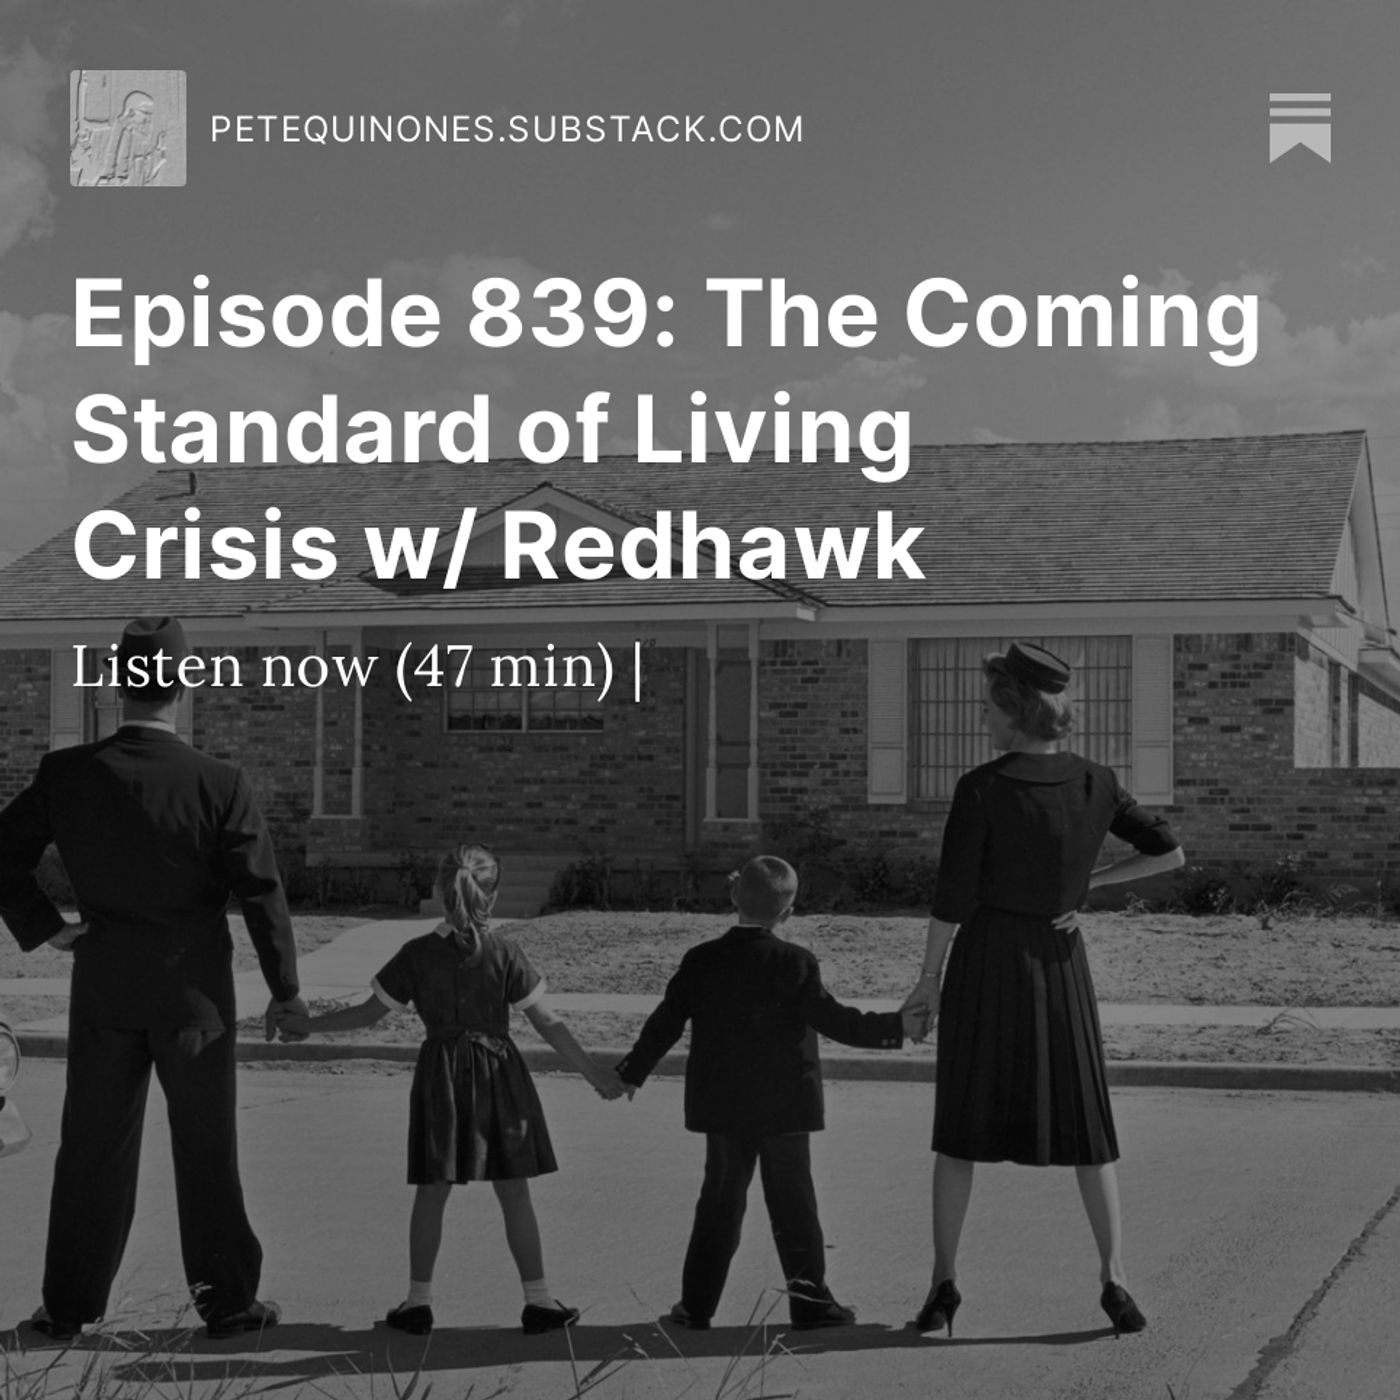 Episode 839: The Coming Standard of Living Crisis w/ Redhawk